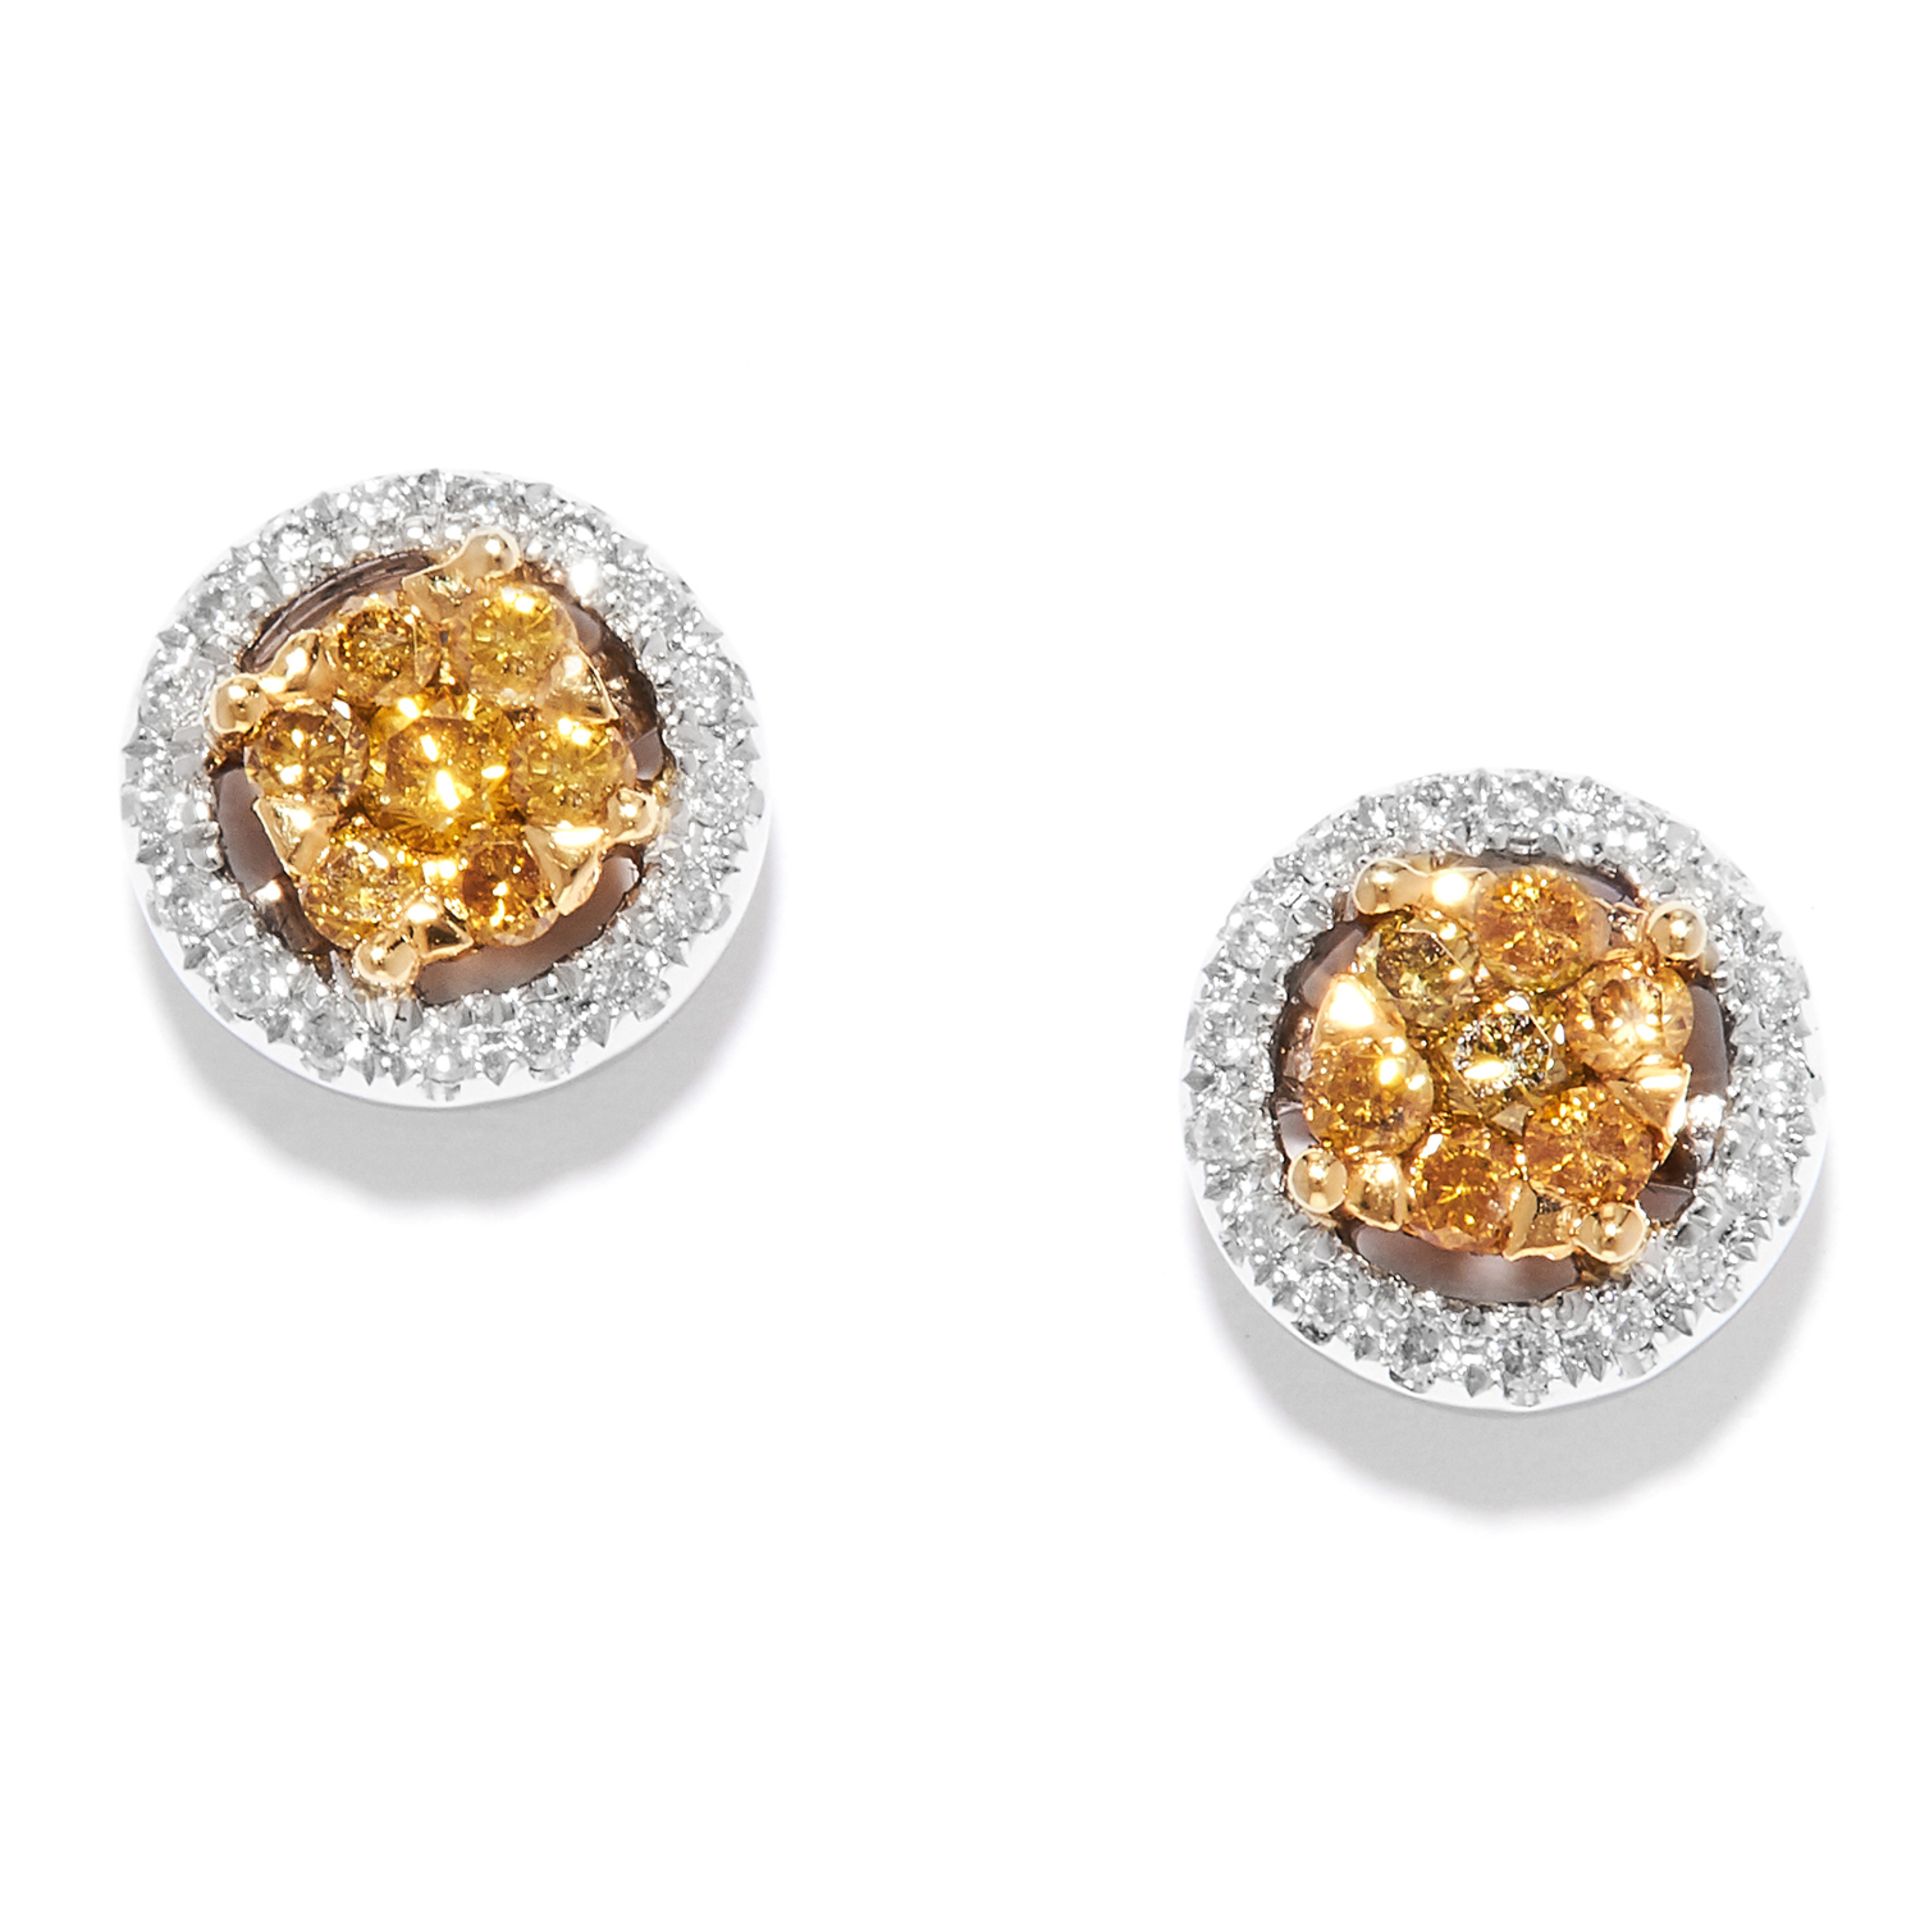 YELLOW AND WHITE DIAMOND STUD EARRINGS in 18ct gold, set with clusters of yellow diamonds within